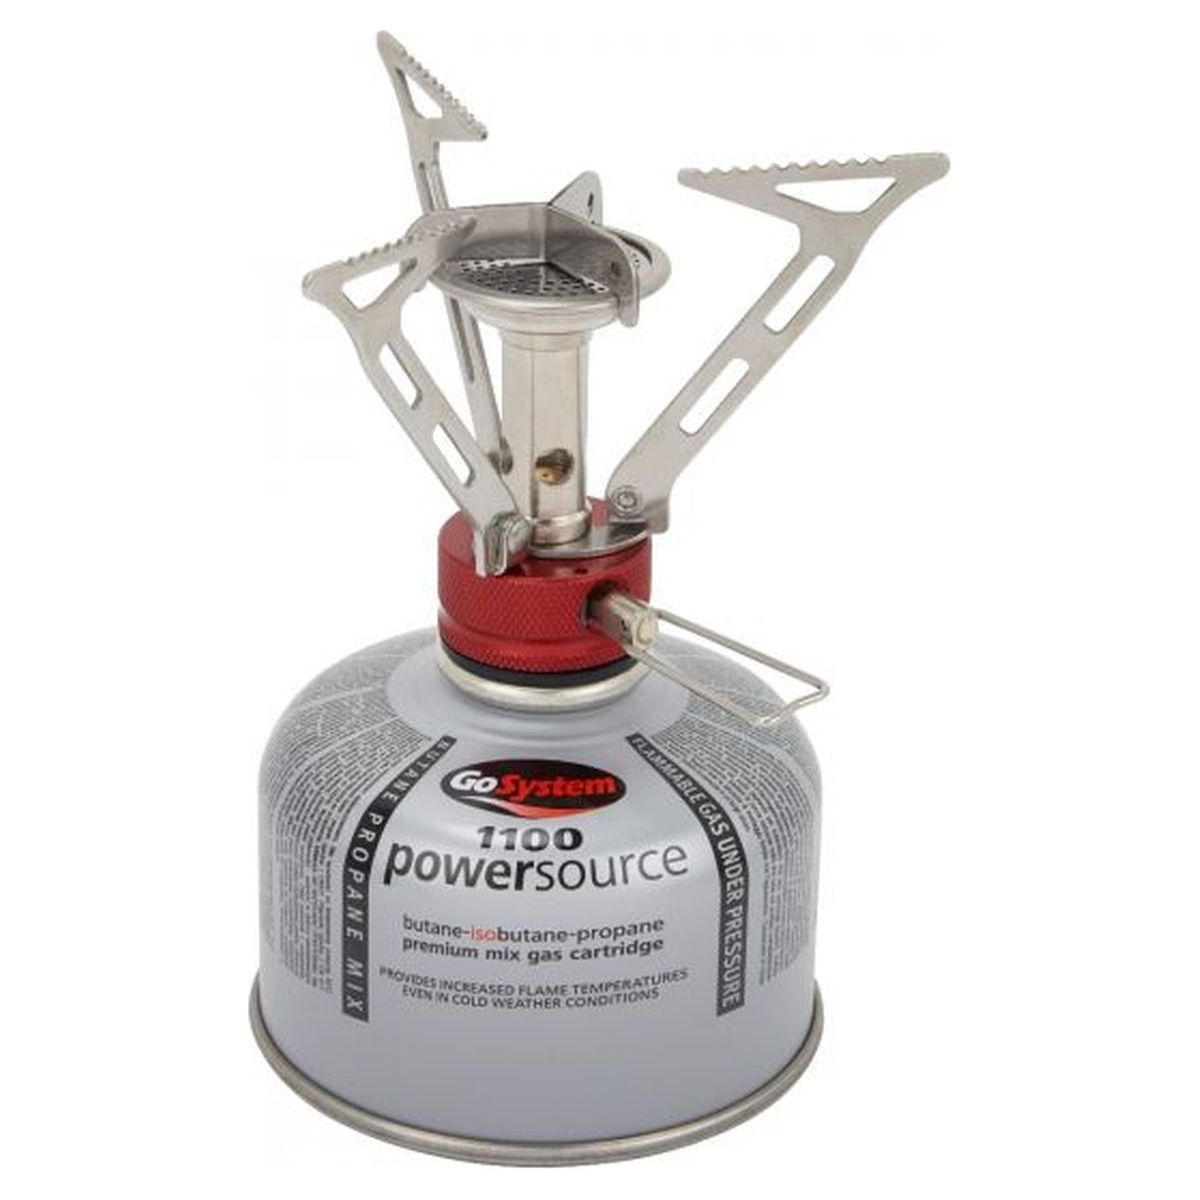 Go System Rapid Backpacking Stove